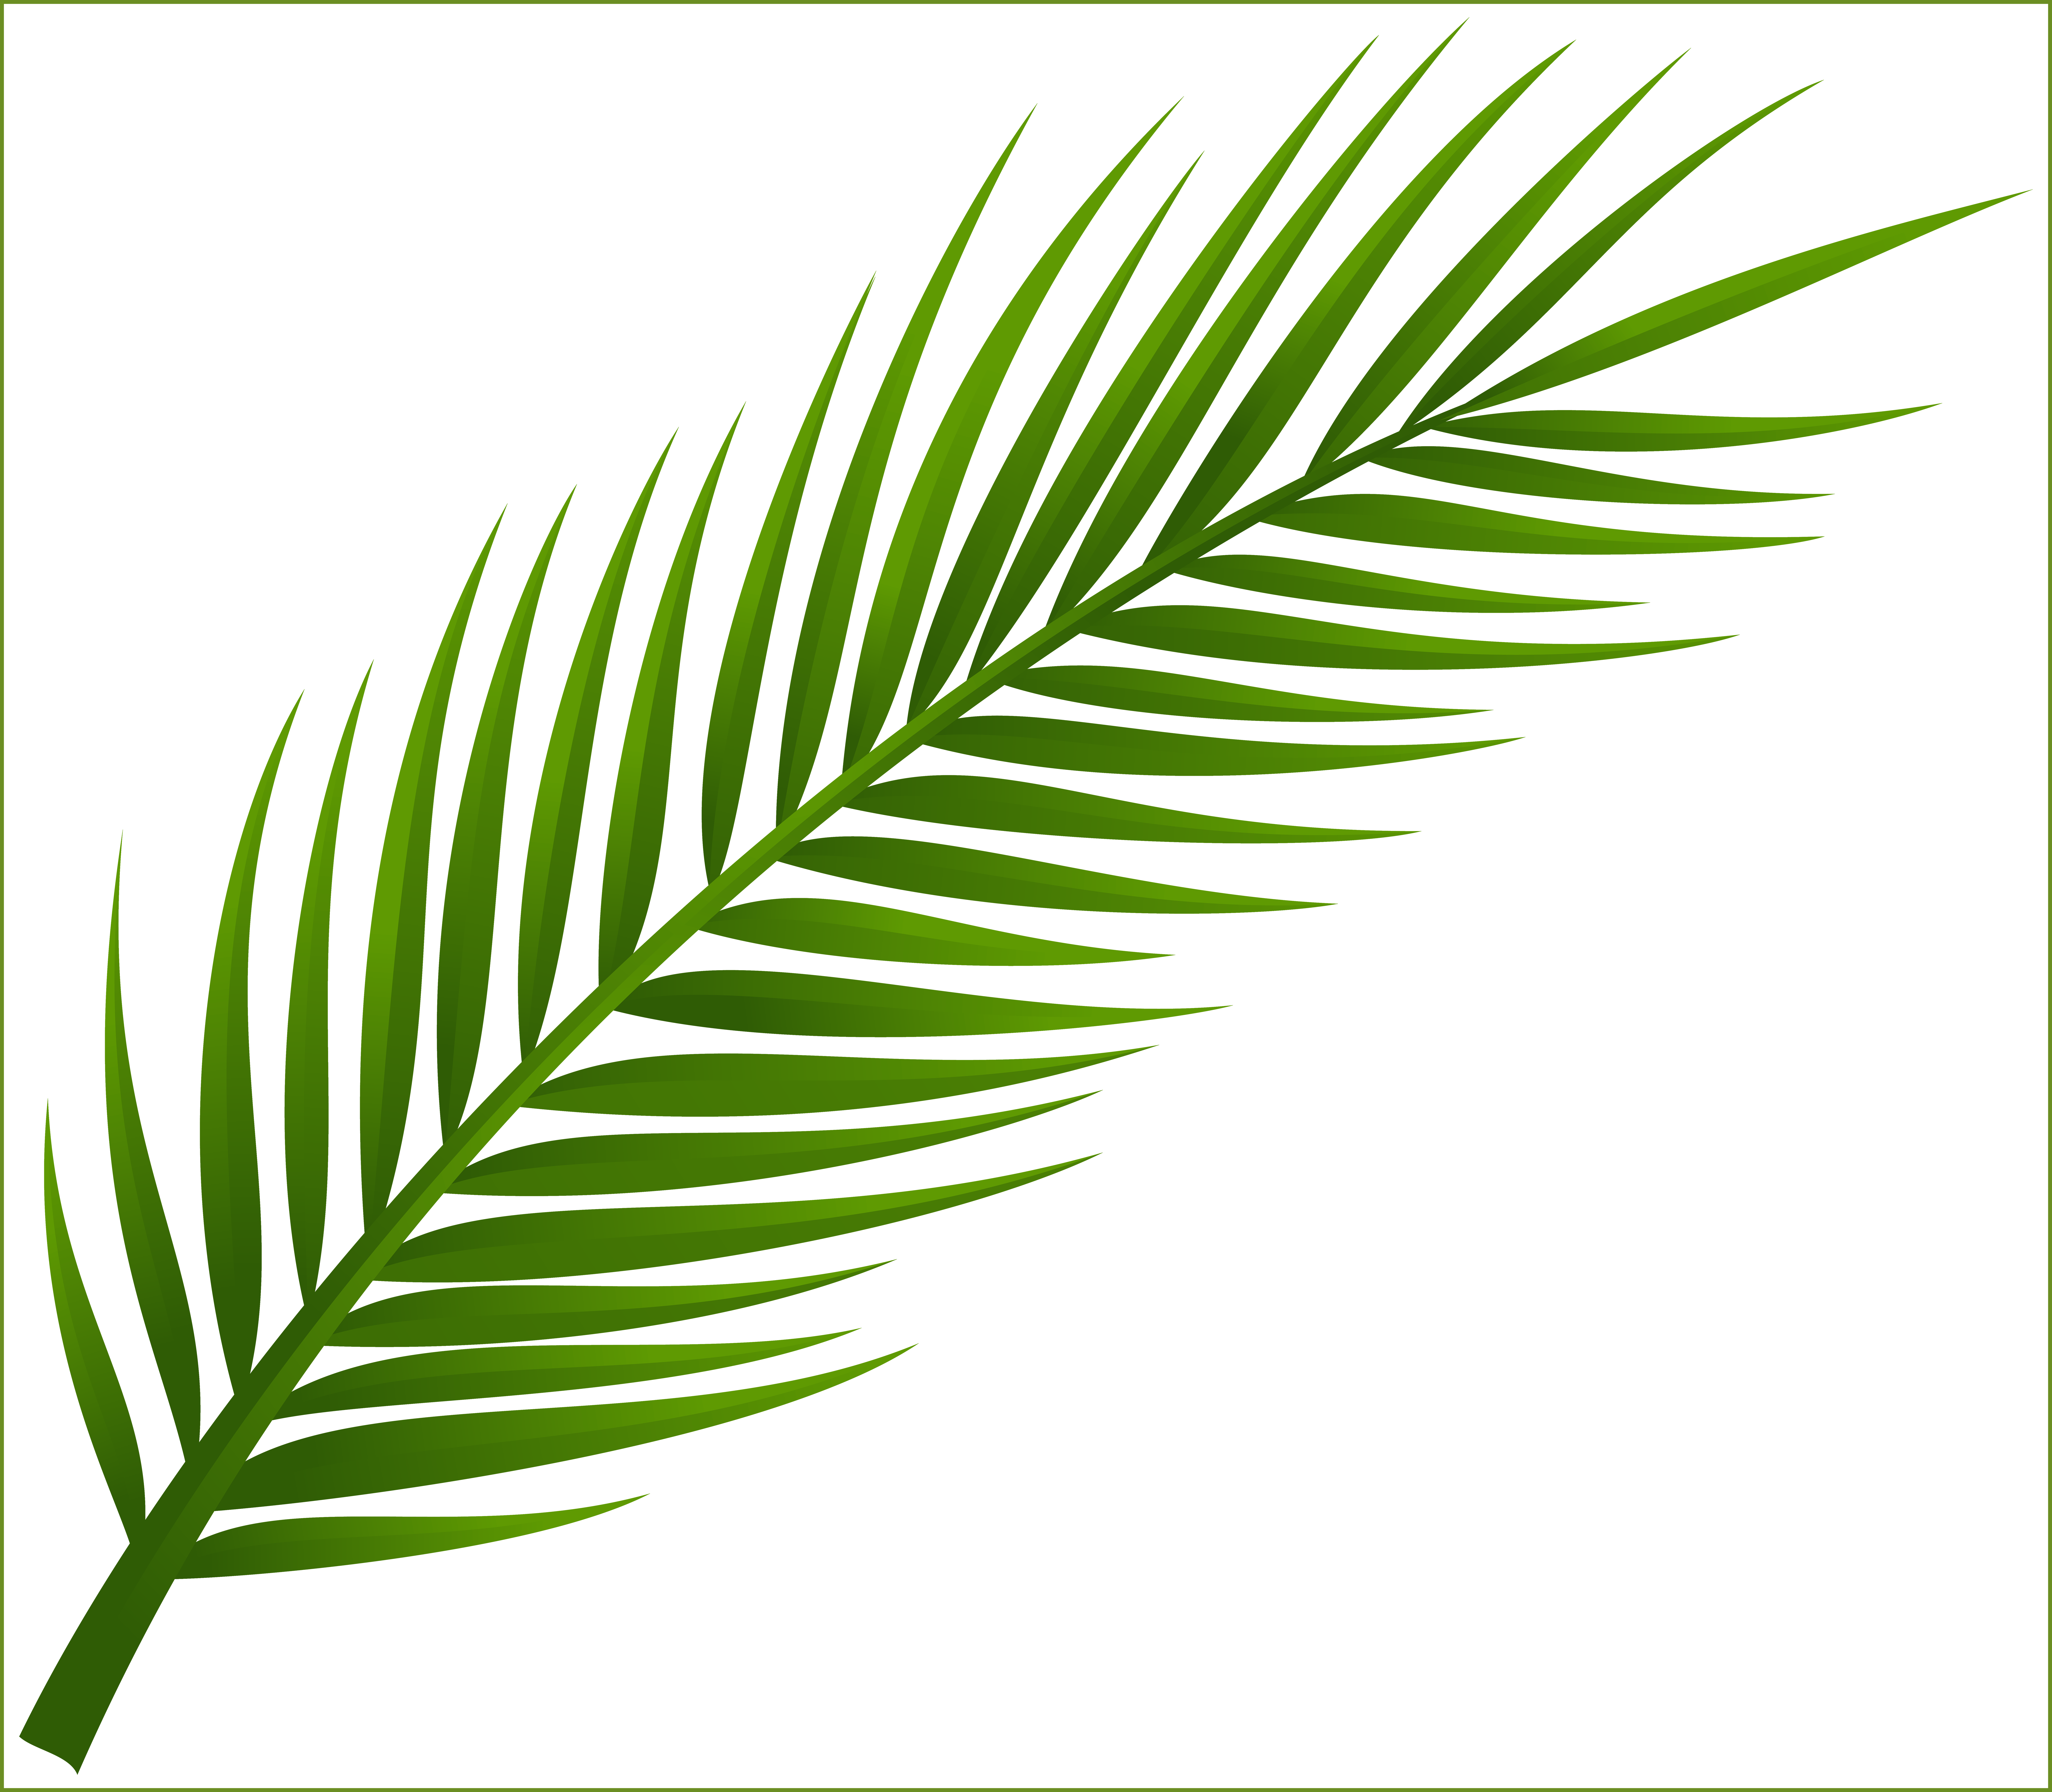 Unbelievable Palm Tree Leaf Png Clip Art Tatts For - Unbelievable Palm Tree Leaf Png Clip Art Tatts For (8030x7013)